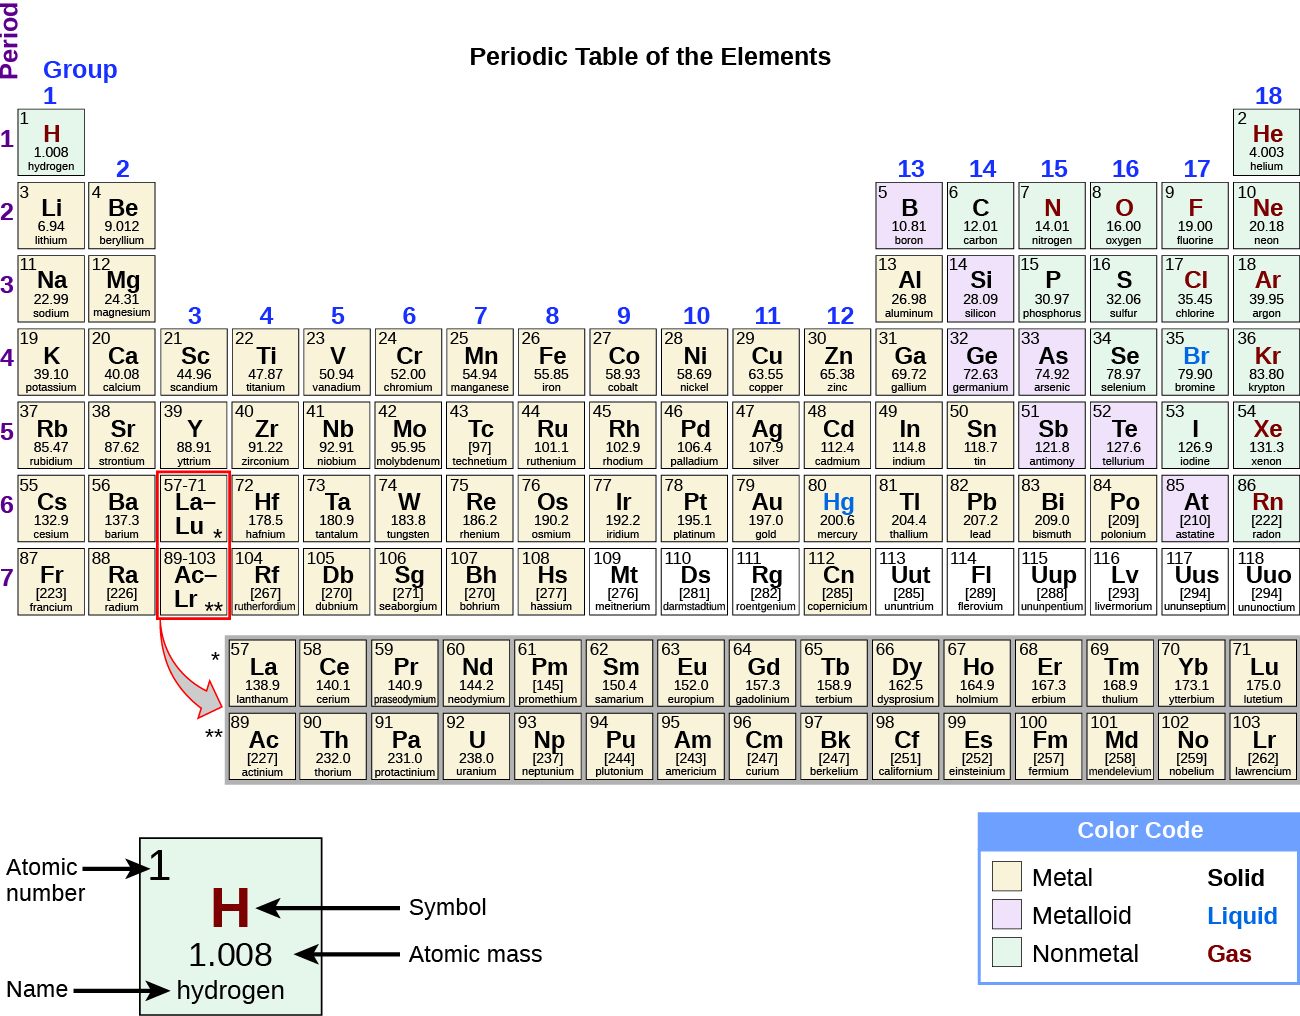 Graphic version of Periodic Table of Elements.